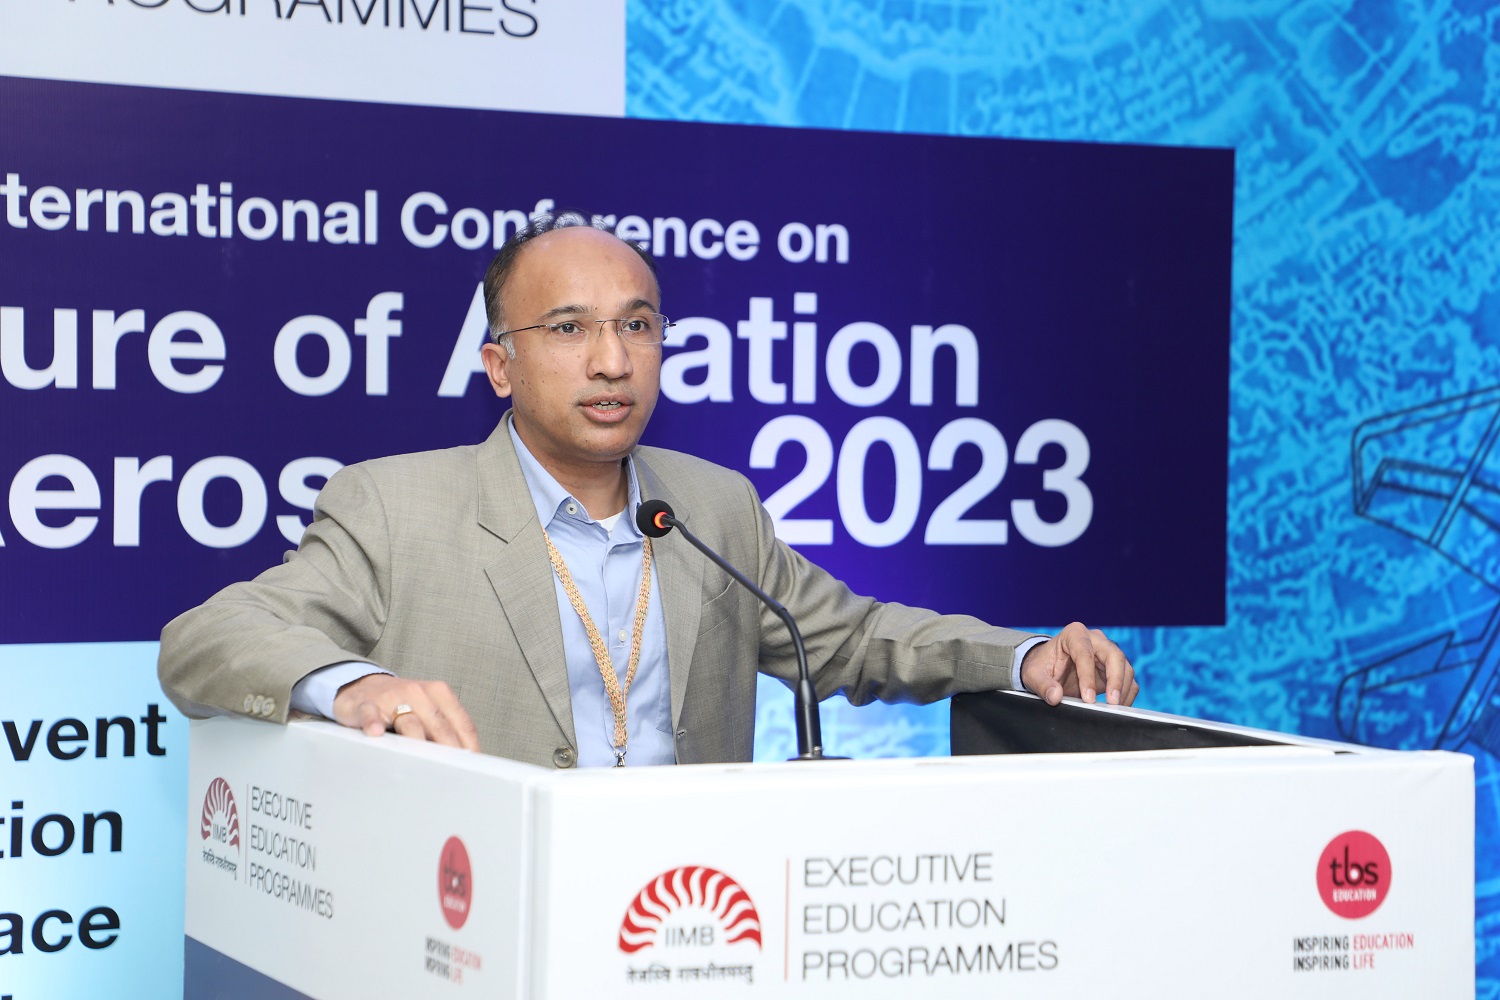 Mr. Anshul Gupta, Managing Director - Travel Industry, Accenture - Advanced Technology Centers in India, speaks on 'Application of Biometrics, AI and Identity Management – Key to Evolving Efficiency for both Passengers & Airports'.